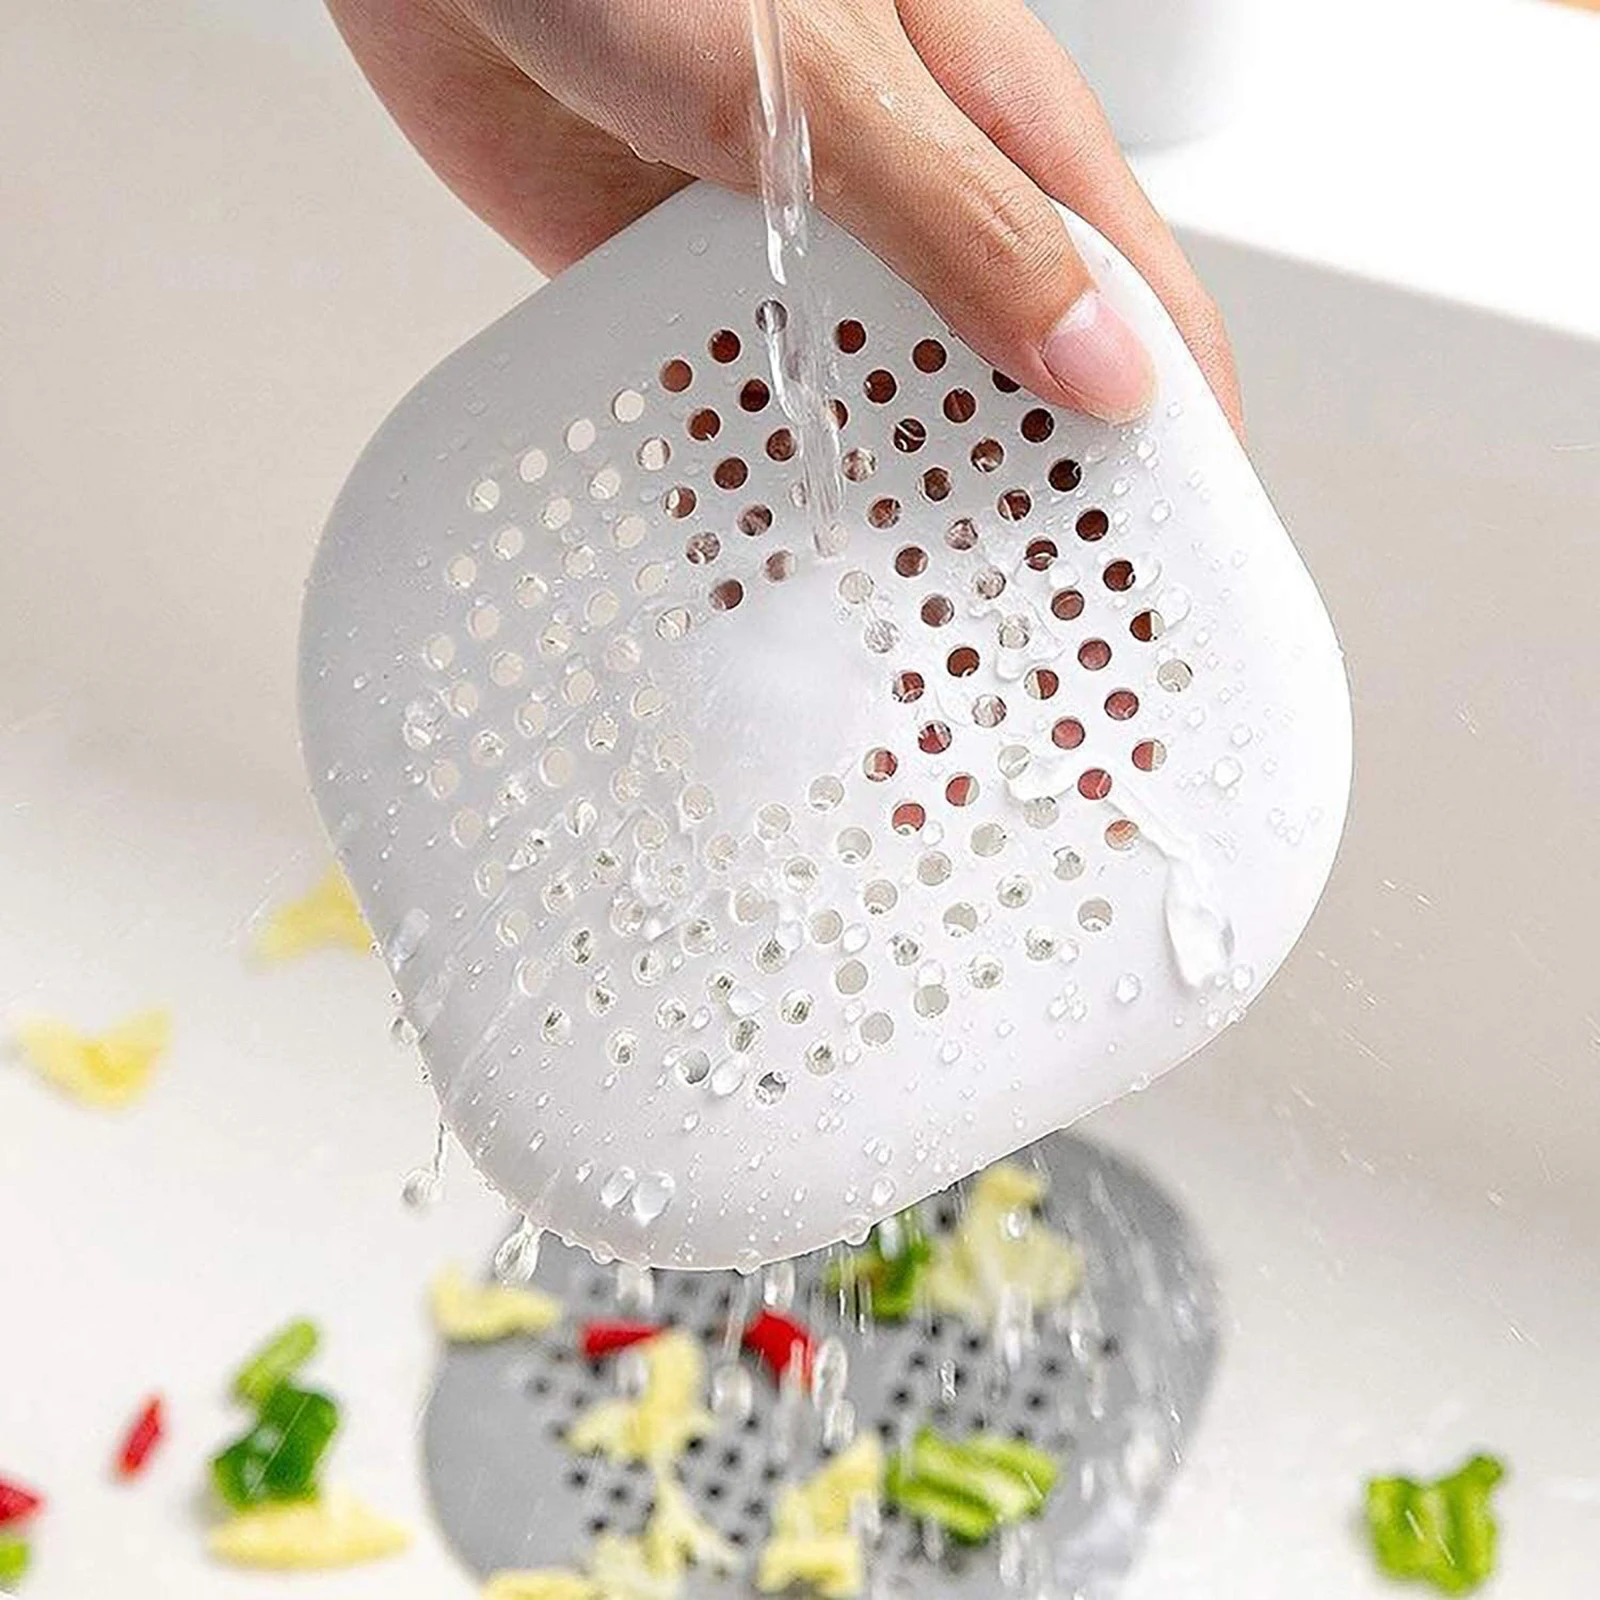 Floor Drain Covers Silicone Drain Strainers Hair Catcher Toilet Sewer Anti Odor Floor Drain Cover for Home Bathroom Supplies